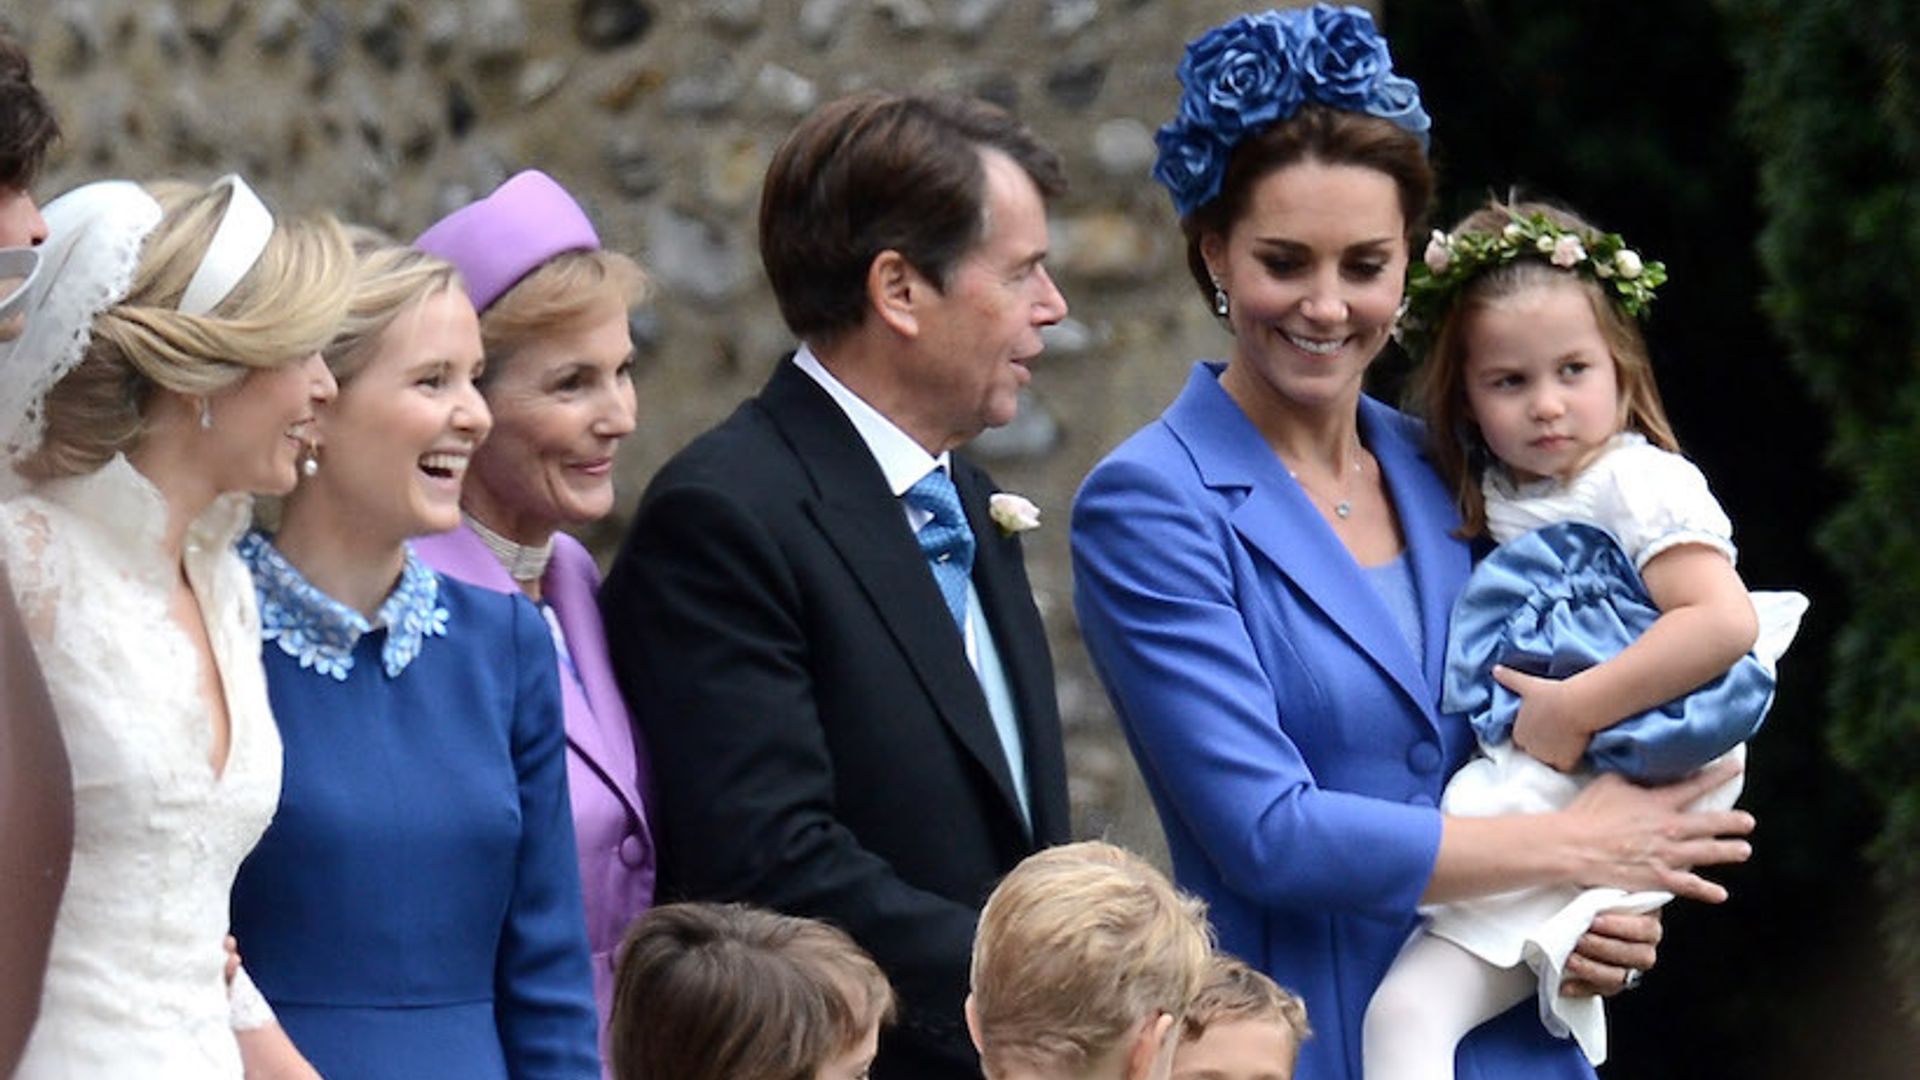 Prince George and Princess Charlotte steal the show at another wedding: All the adorable photos